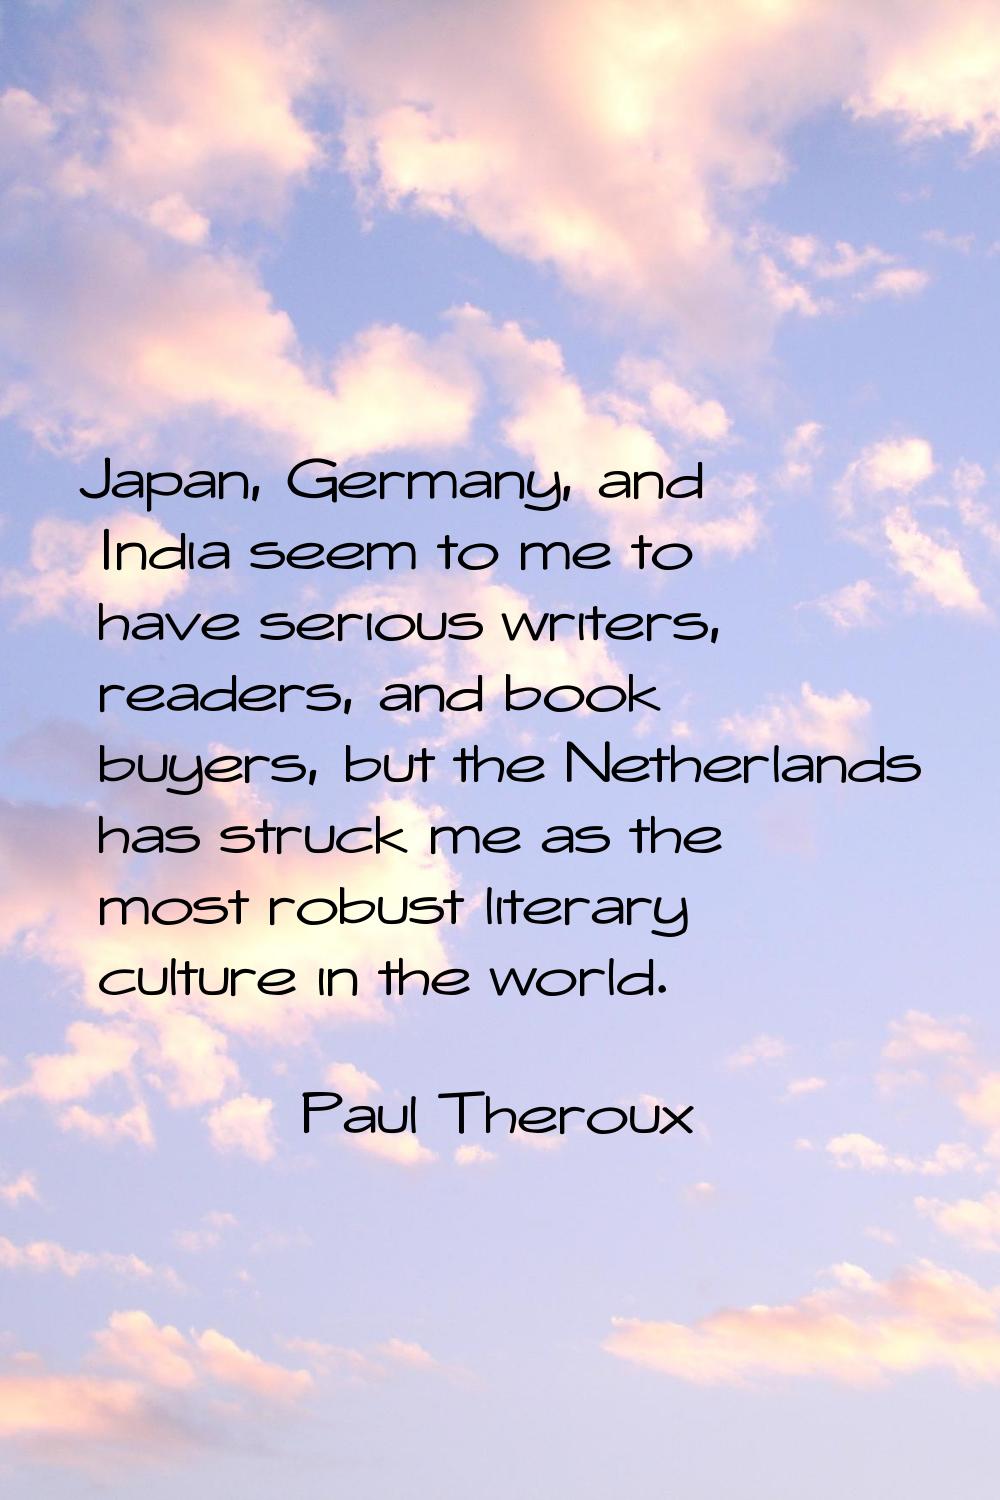 Japan, Germany, and India seem to me to have serious writers, readers, and book buyers, but the Net